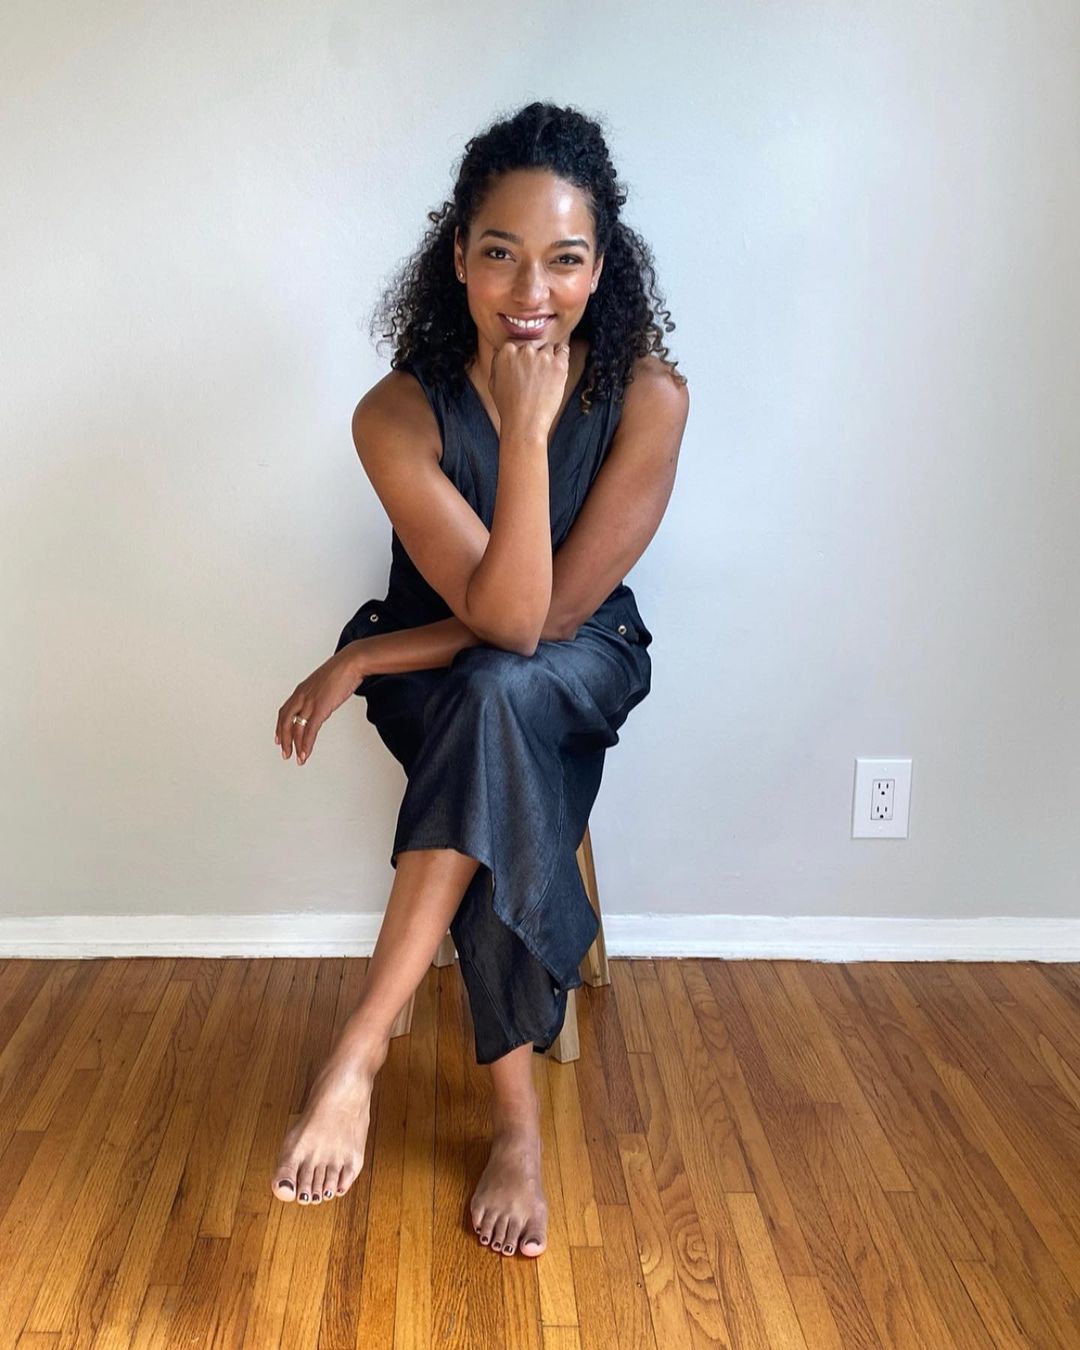 9 Black Doulas And Midwives To Follow Now — Whether You're Expecting Or Not